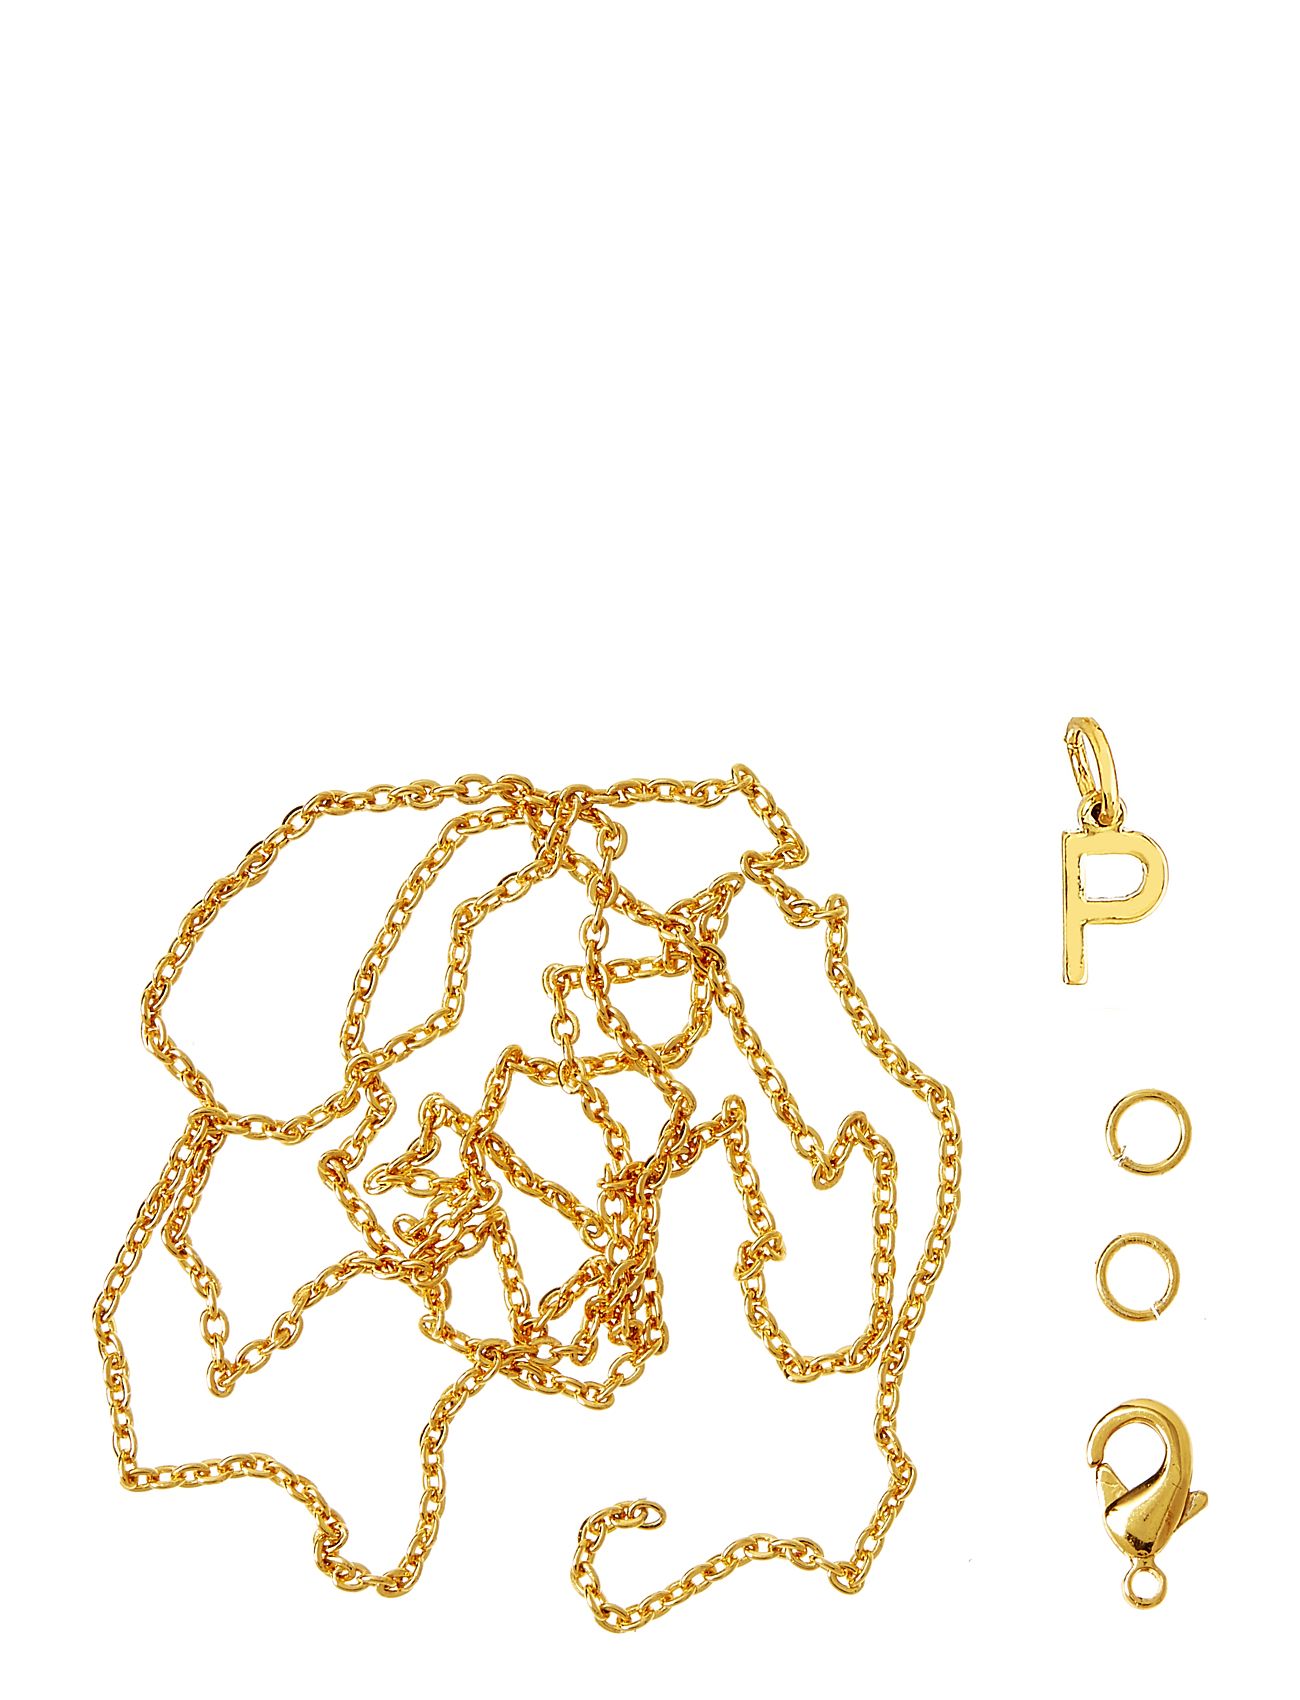 Letter P Gp With O-Ring, Chain And Clasp Toys Creativity Drawing & Crafts Craft Jewellery & Accessories Gold Me & My Box